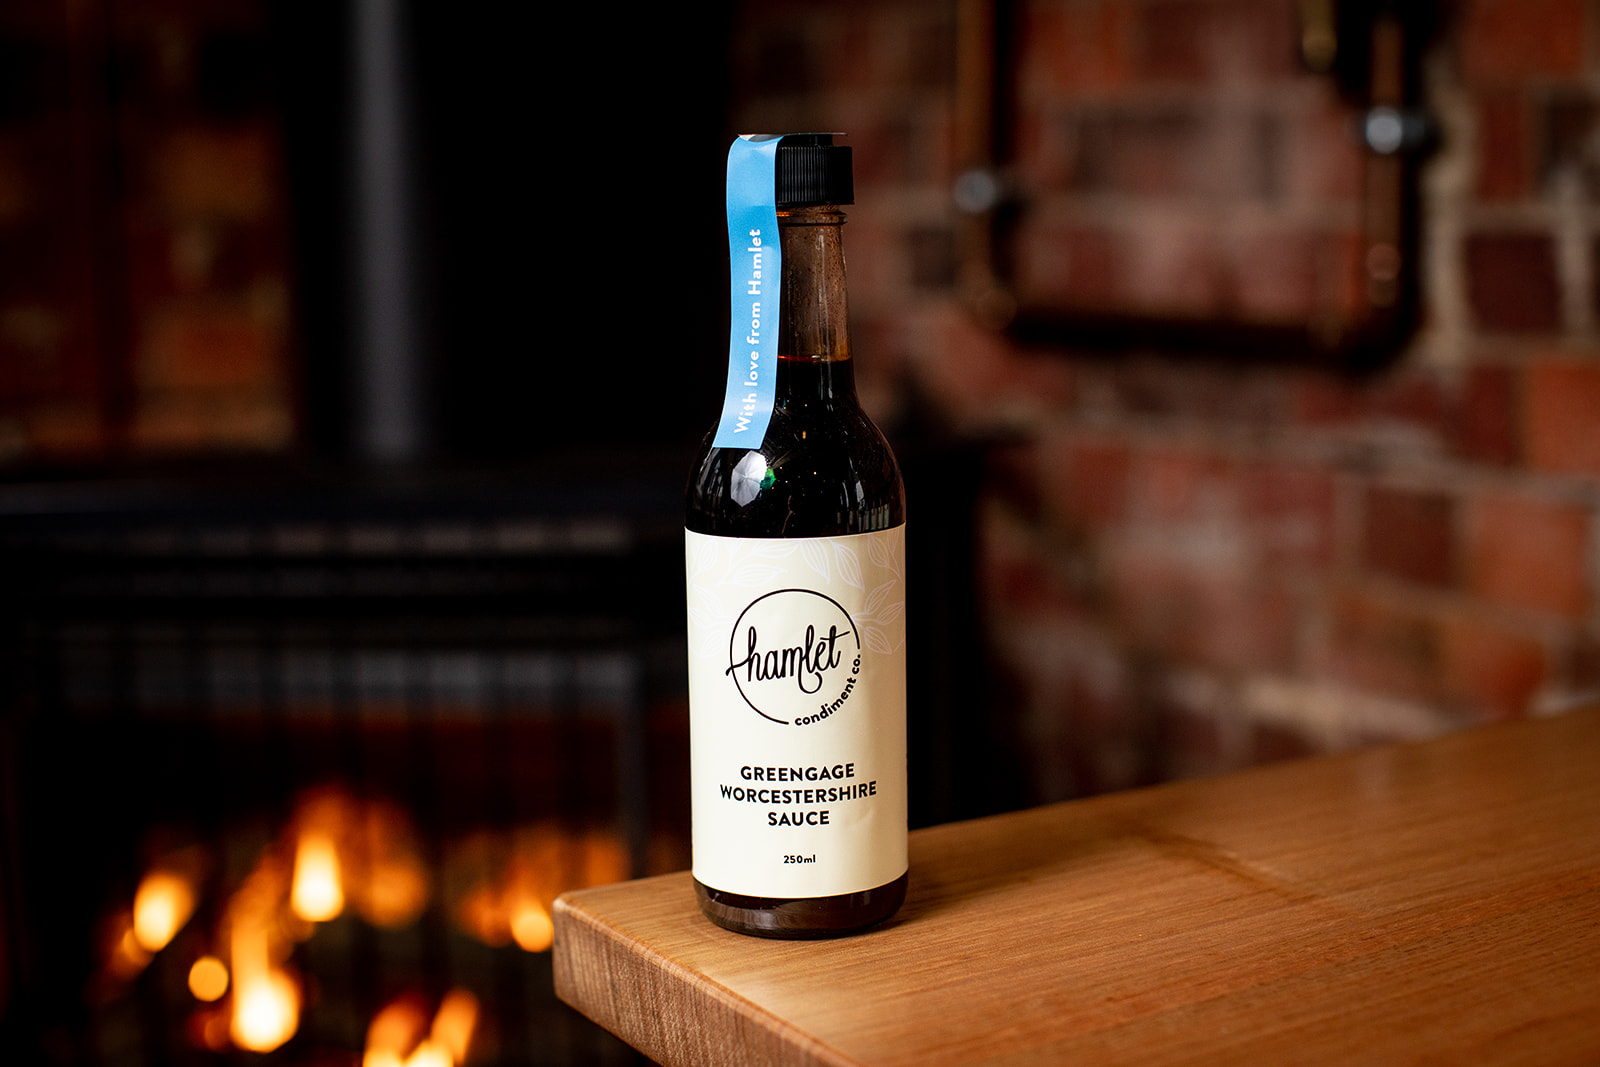 A bottle of Hamlet's house made Greengage Worcestershire Sauce sitting on a timber table against a brick wall.